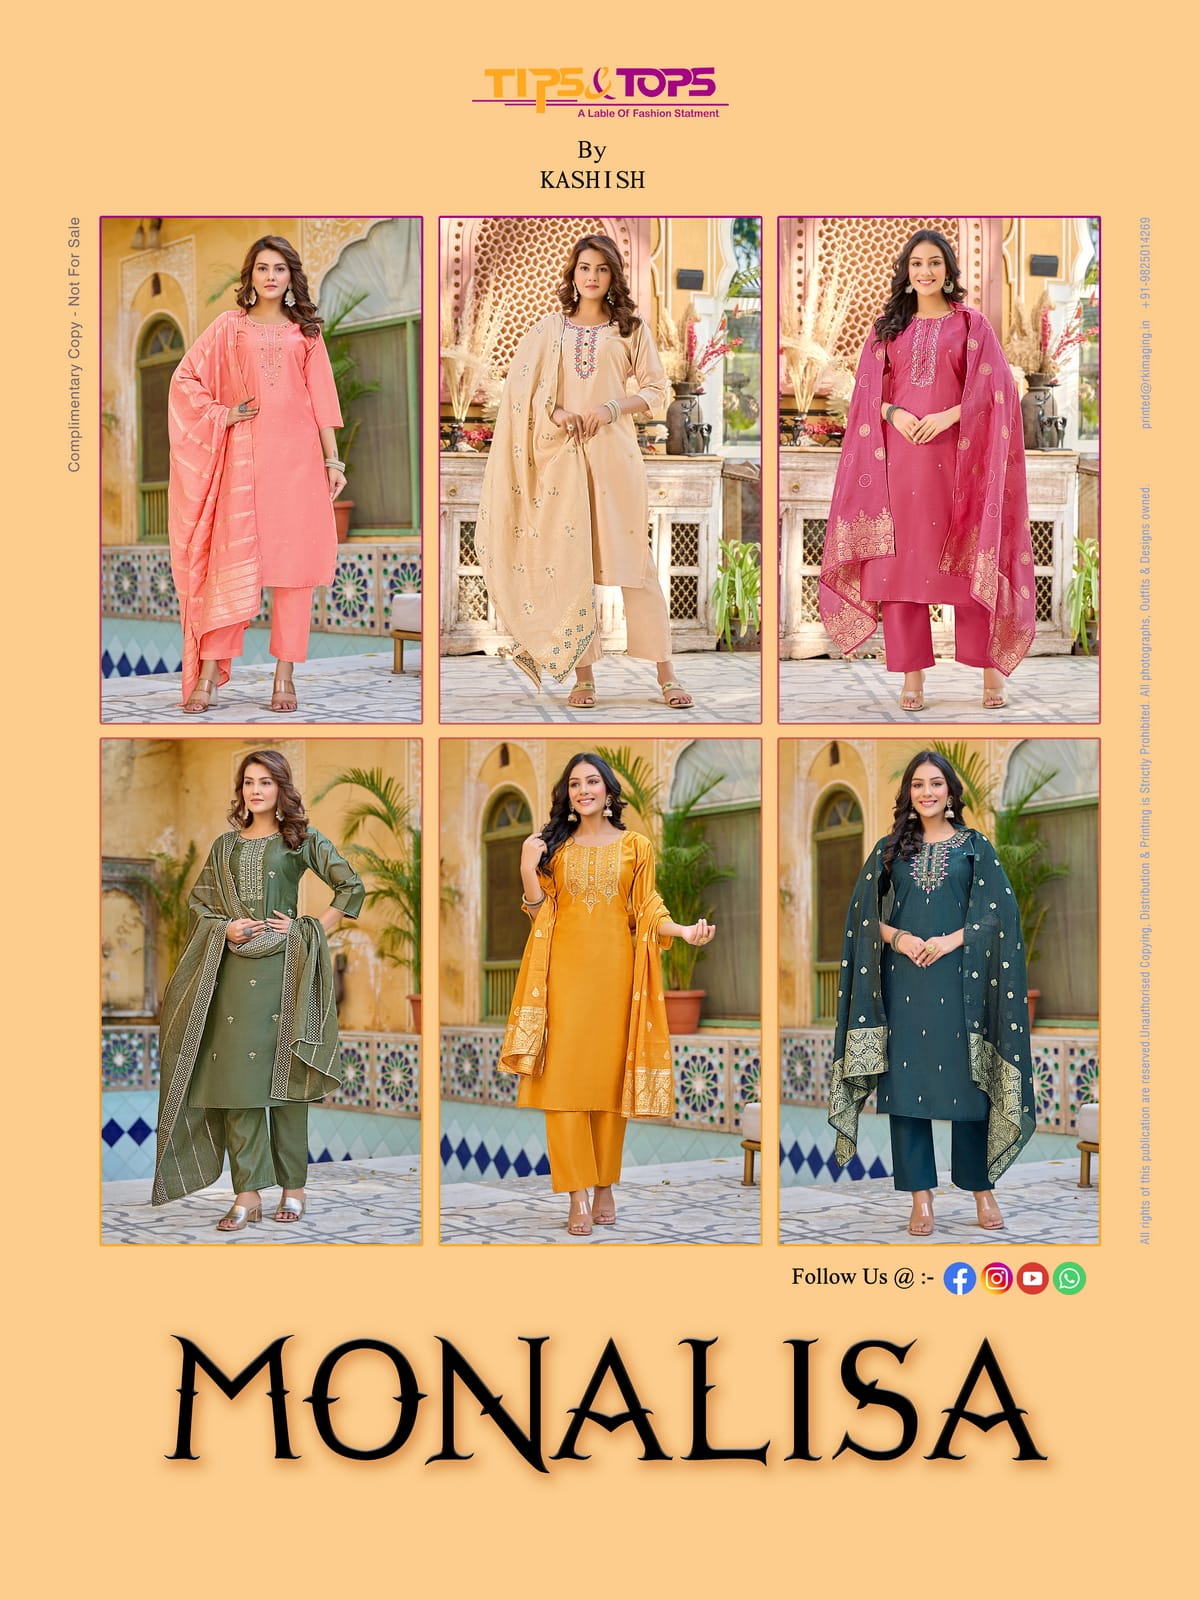 Tips And Tops Monalisa collection 2